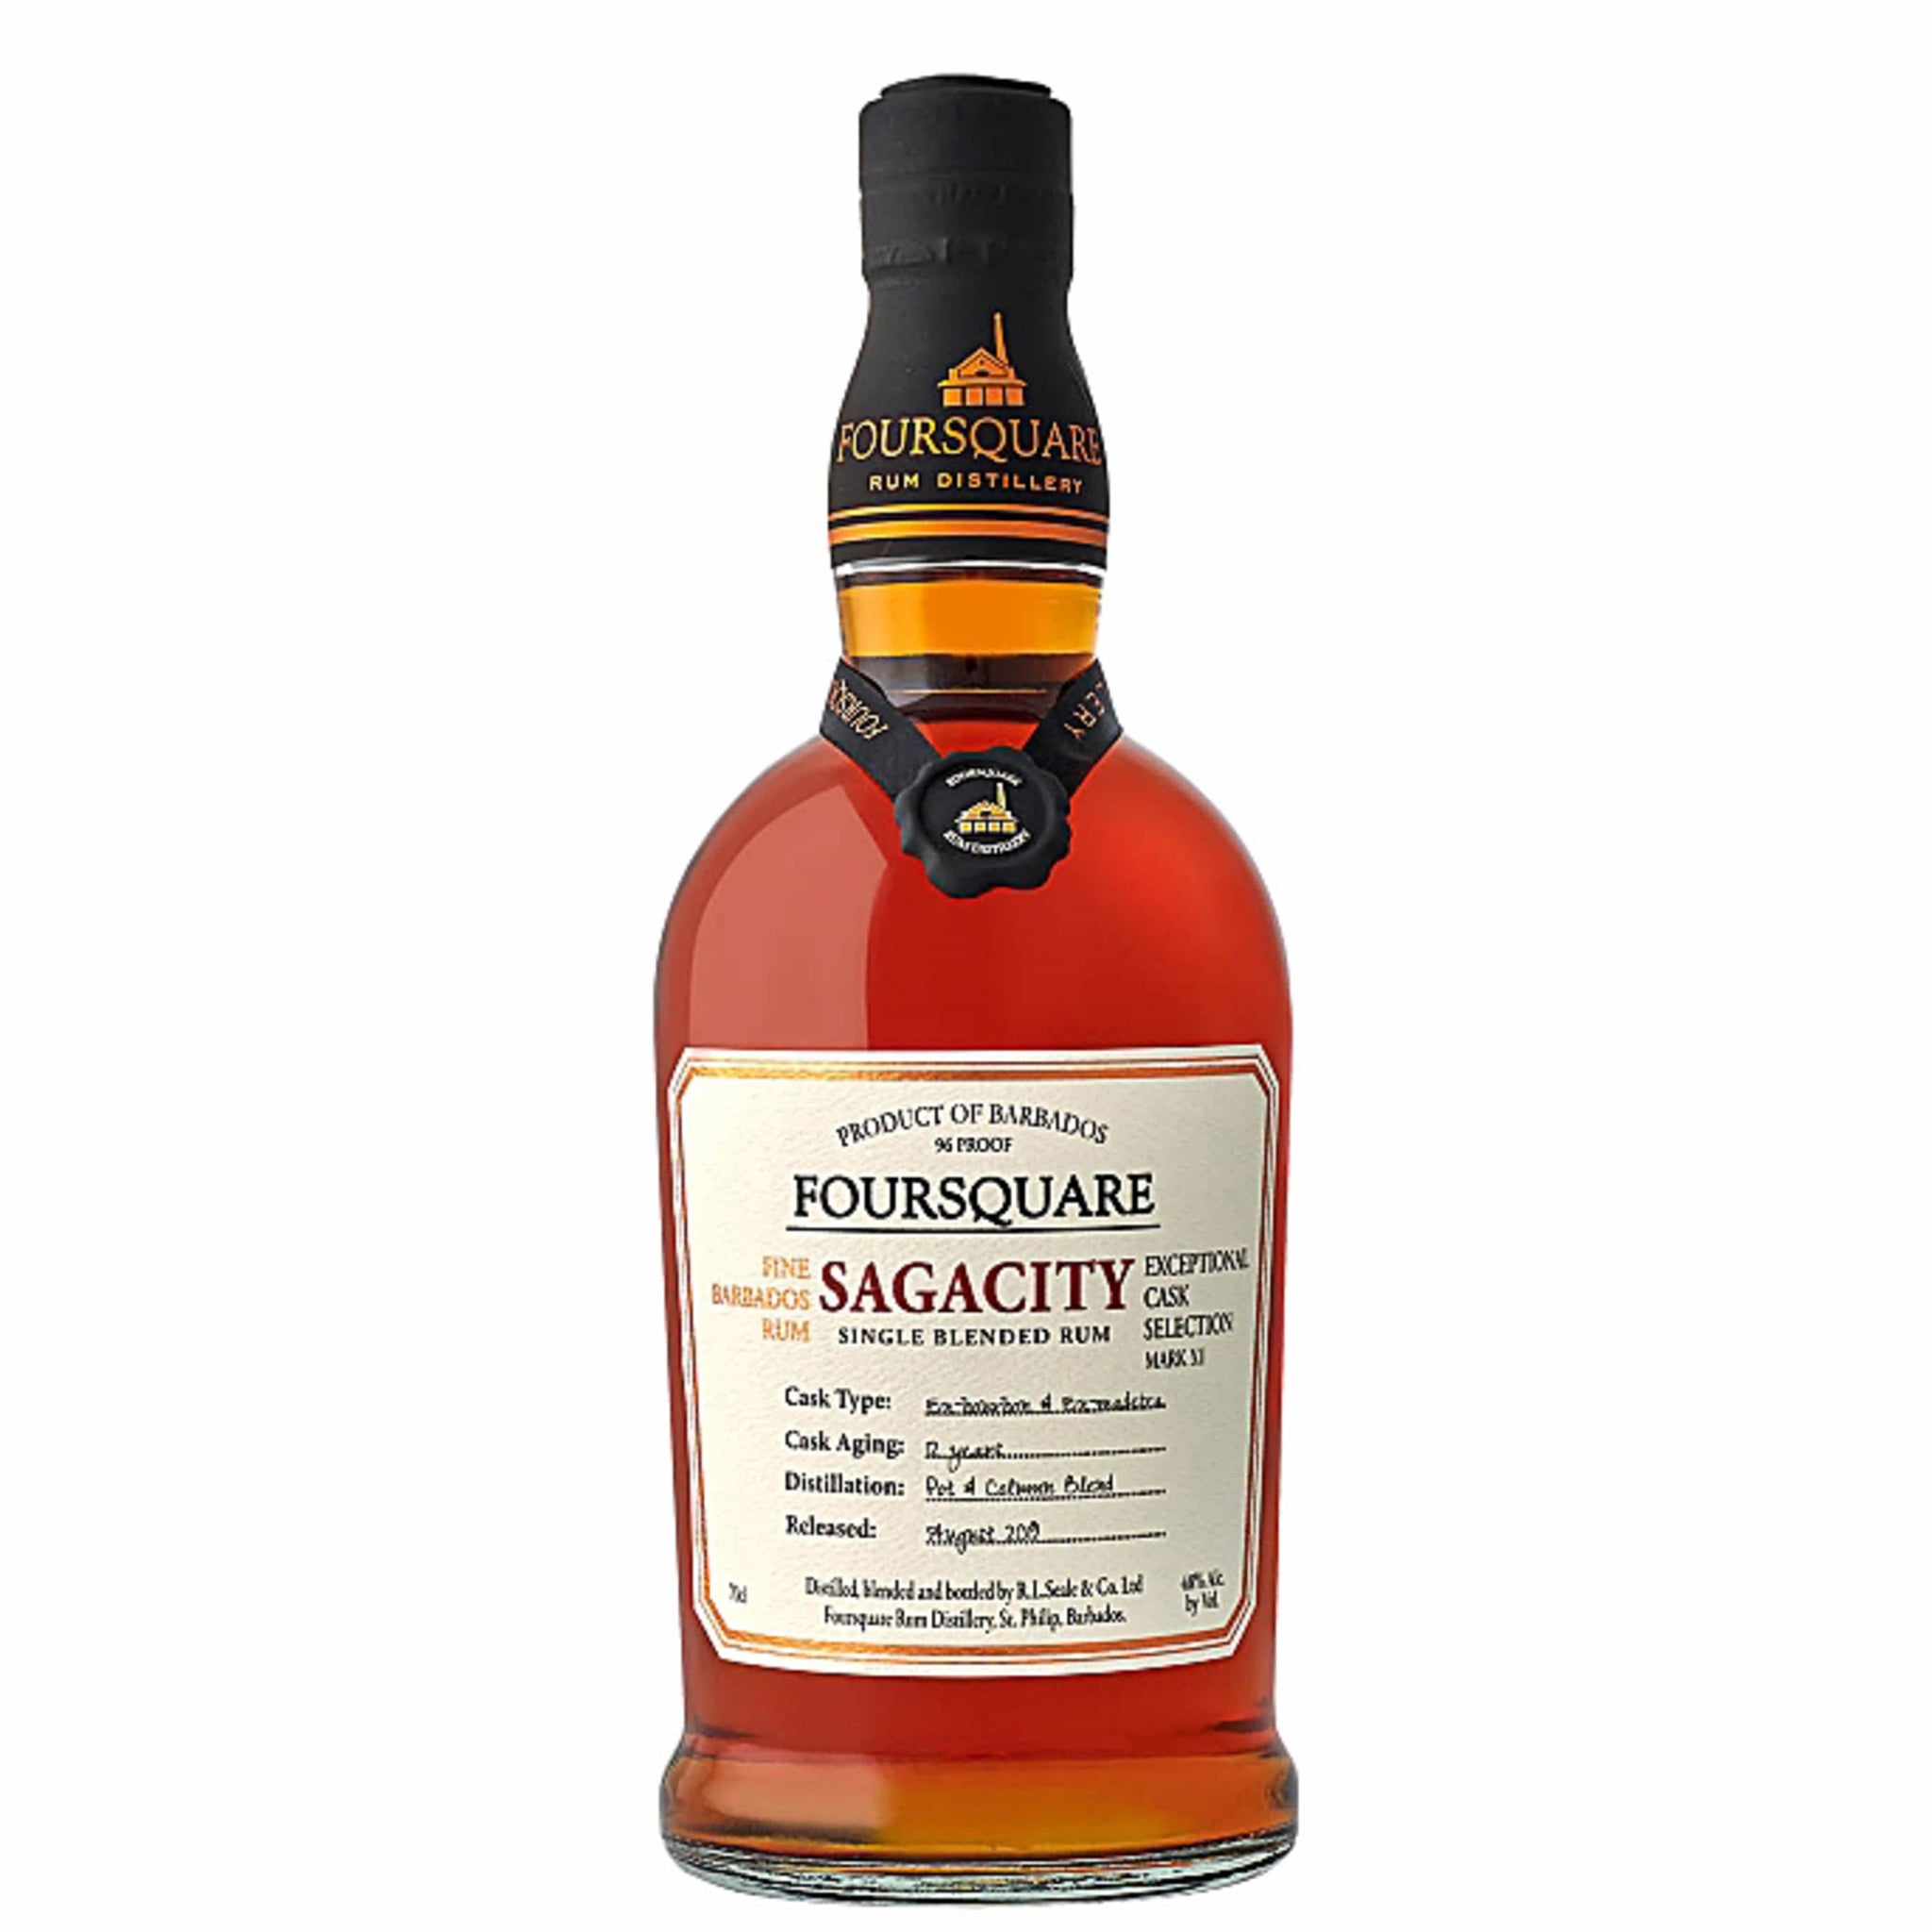 Buy Foursquare 12 Year Old Sagacity Rum 750ml Online